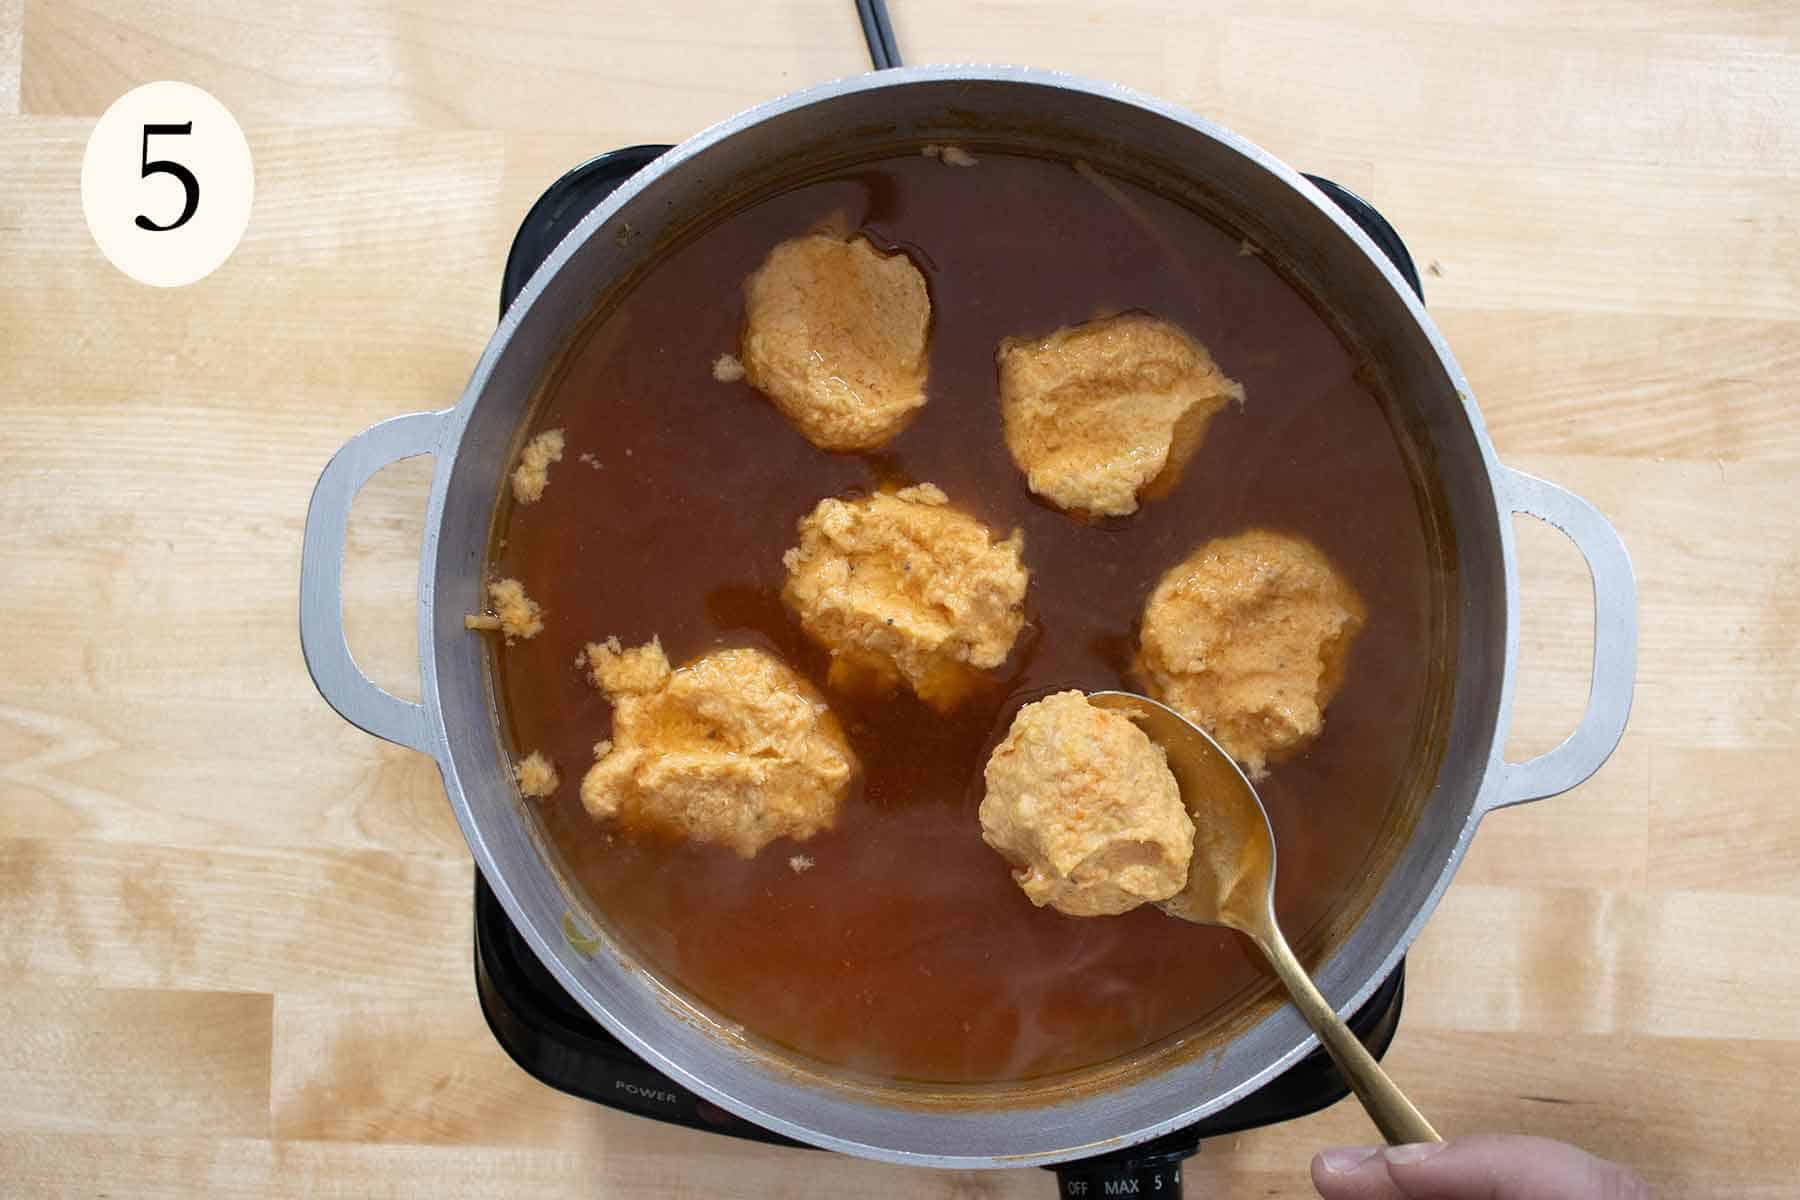 bolitas de platano being cooked in a soup.